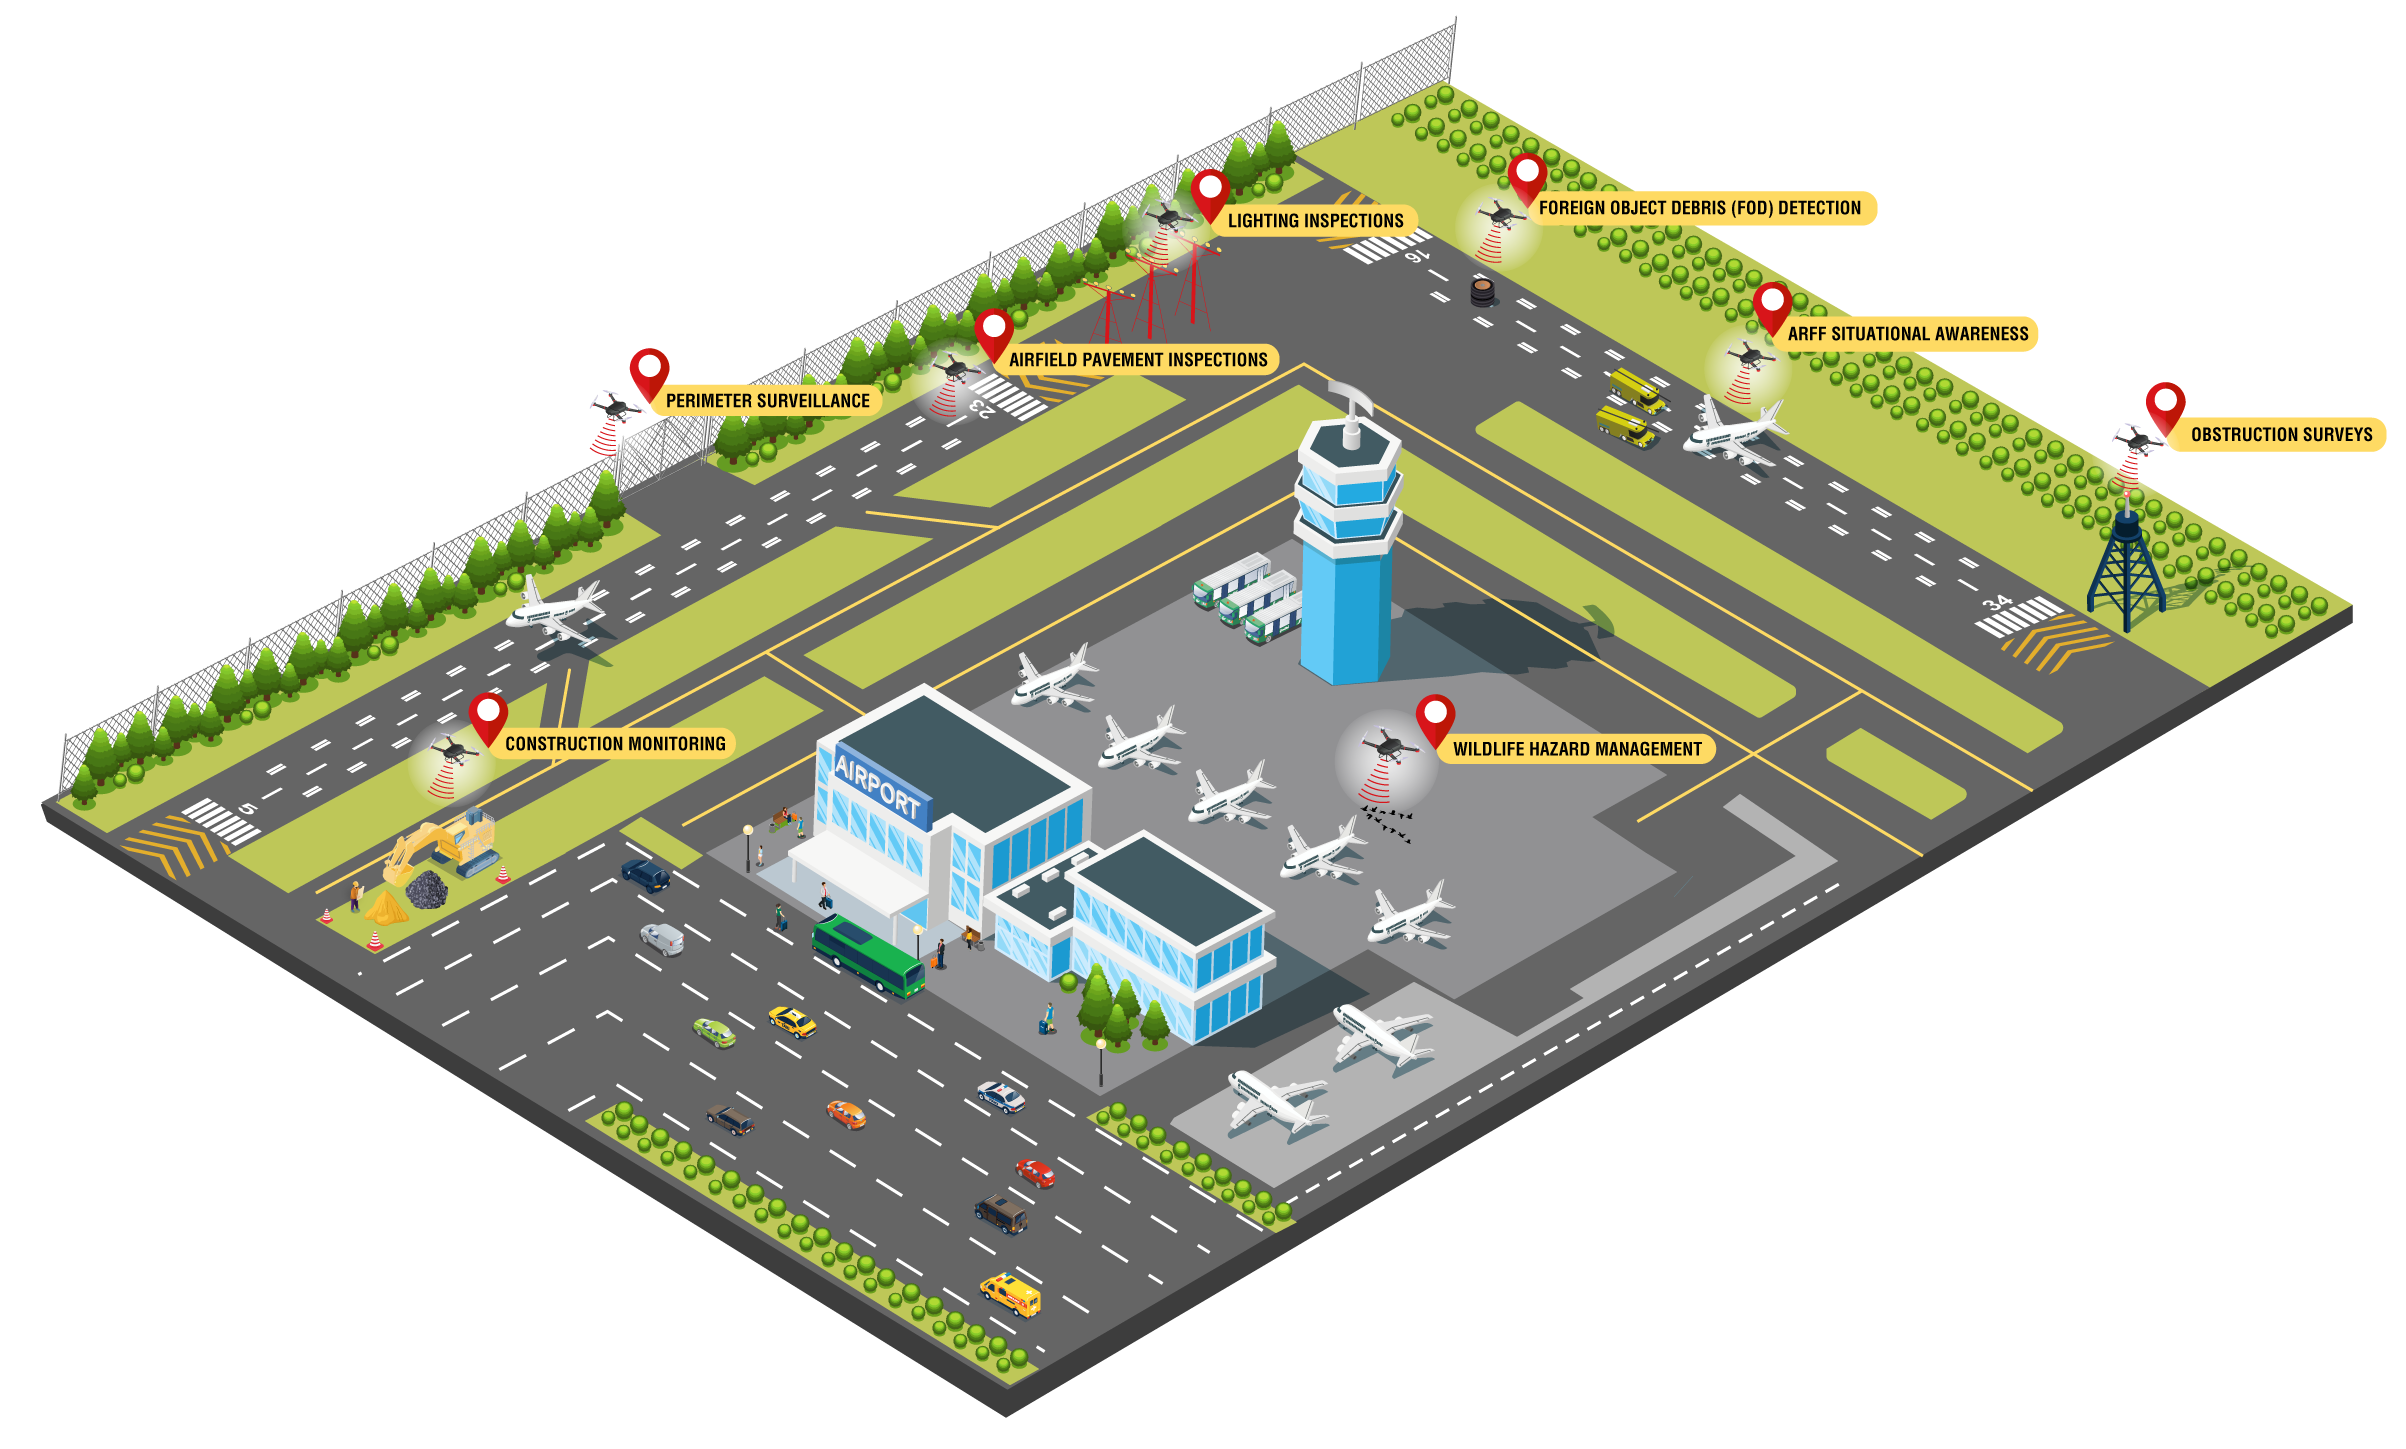 This is an illustrated aerial view of an airport. There are 8 drones around the airport that show the sUAS use cases: Construction Monitoring; Perimeter Surveillance; Airfield Pavement Inspections; Lighting Inspections; Foreign Object Debris (FOD) Detection; ARFF Situational Awareness; Obstruction Surveys; Wildlife Hazard Management